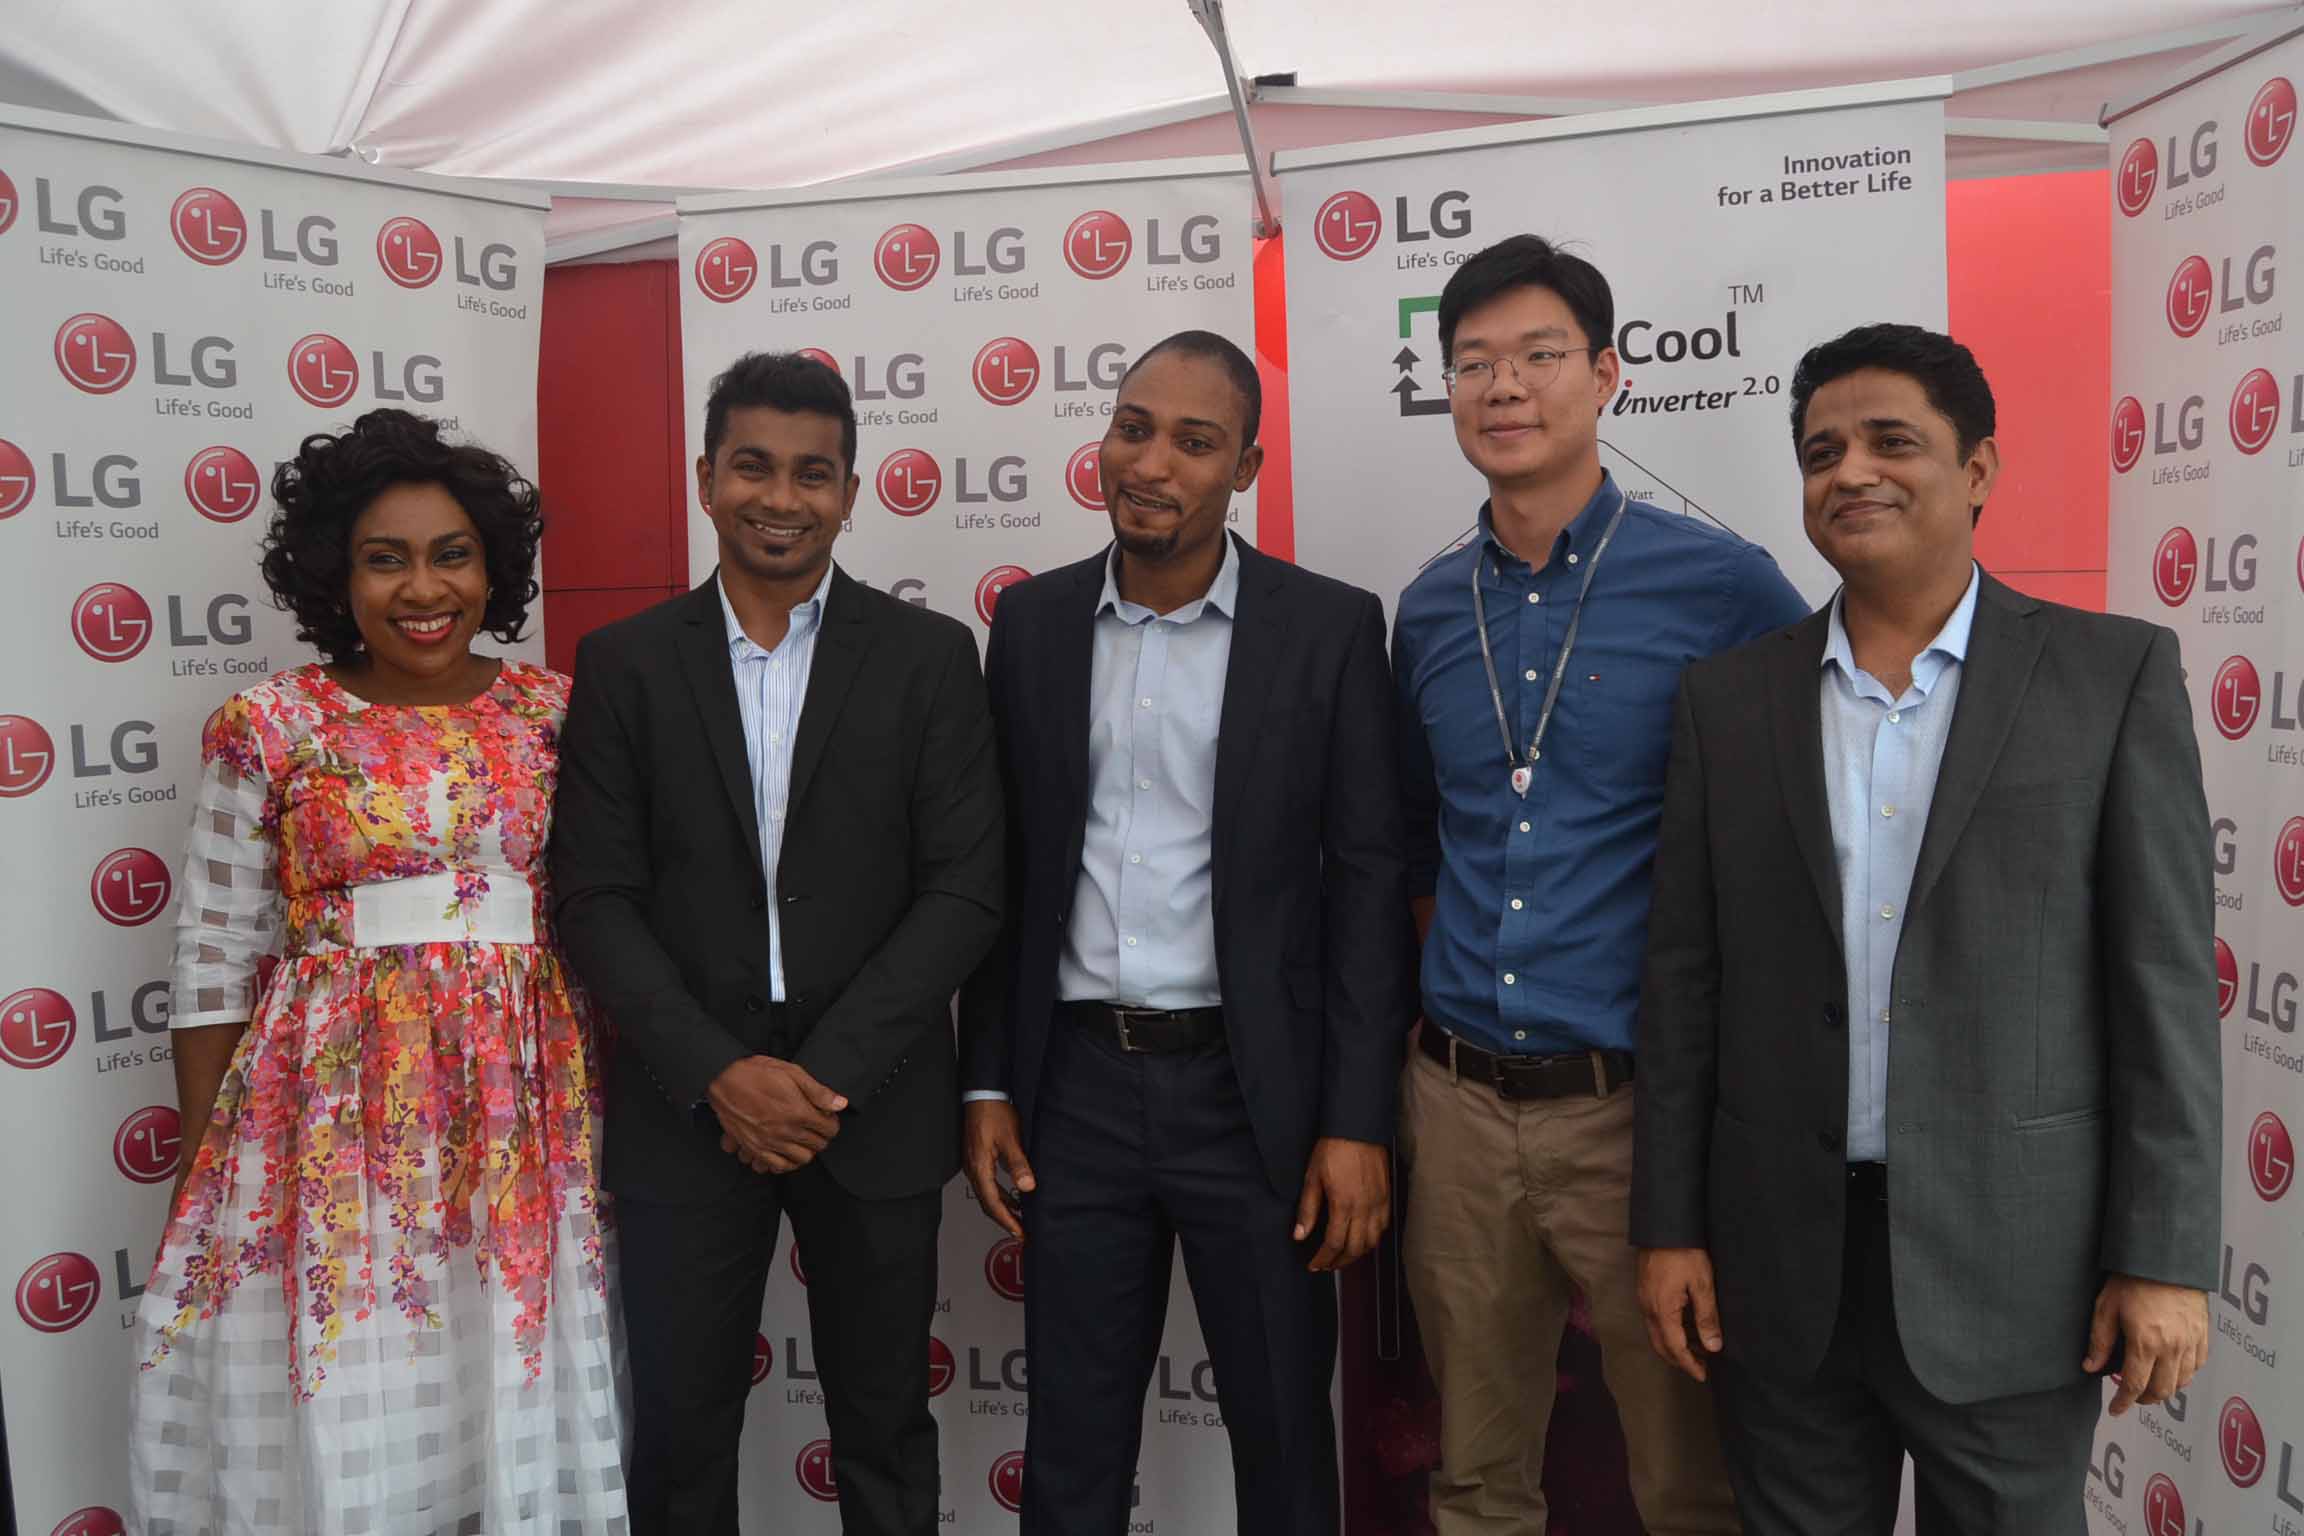  L-R: Marketing Assistant, Home Appliances division, LG Electronics West Africa operations, Mrs Blessing Obiesie; Product Marketing Manager, Home Appliances division, LG Electronics West Africa operations, Mr. Nishant Kawoor; Product Trainer, LG Electronics West Africa operations, Mr. Moses Osime; Assistant Marketing Manager, Home Appliances division, LG Electronics West Africa operations, Mr. Choon Hung Har; and General Manager, Corporate Marketing, LG Electronics West Africa Operations, Mr. Rajesh Agnihotri, during LG Evercool Smart Inverter Refrigerator Launch, in Lagos.